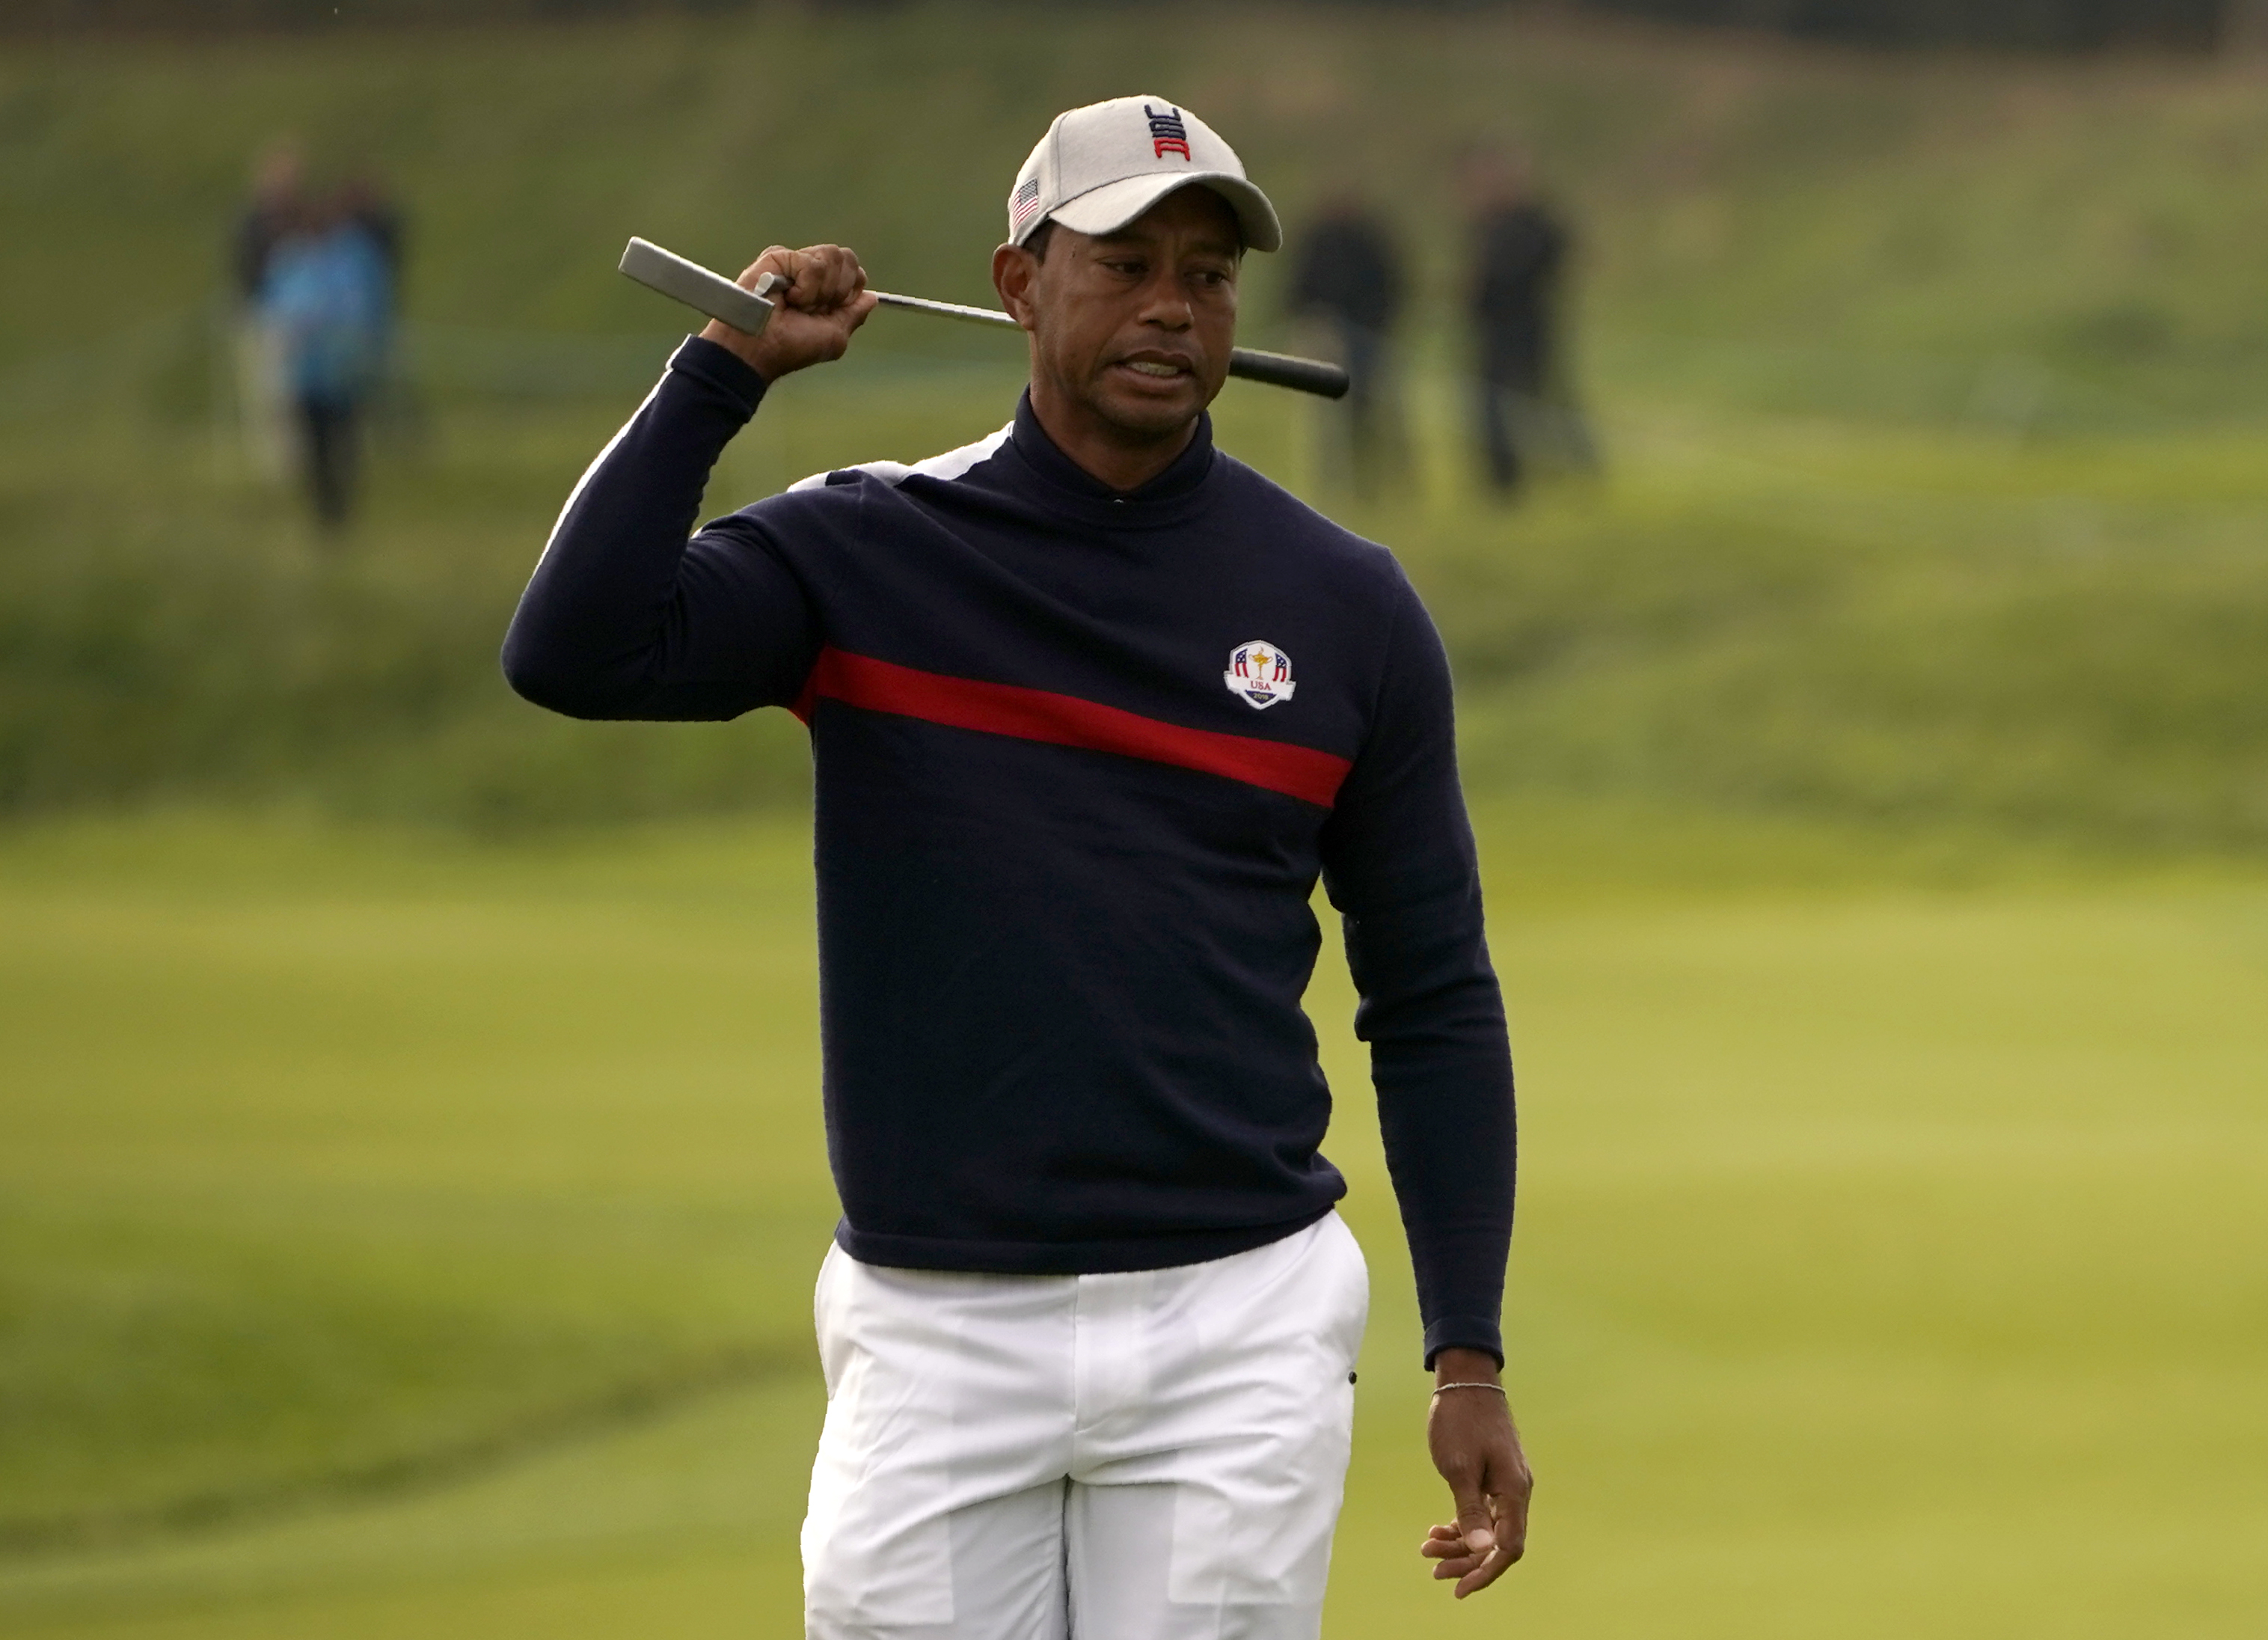 USA take early Ryder Cup lead after impressive fourballs performance